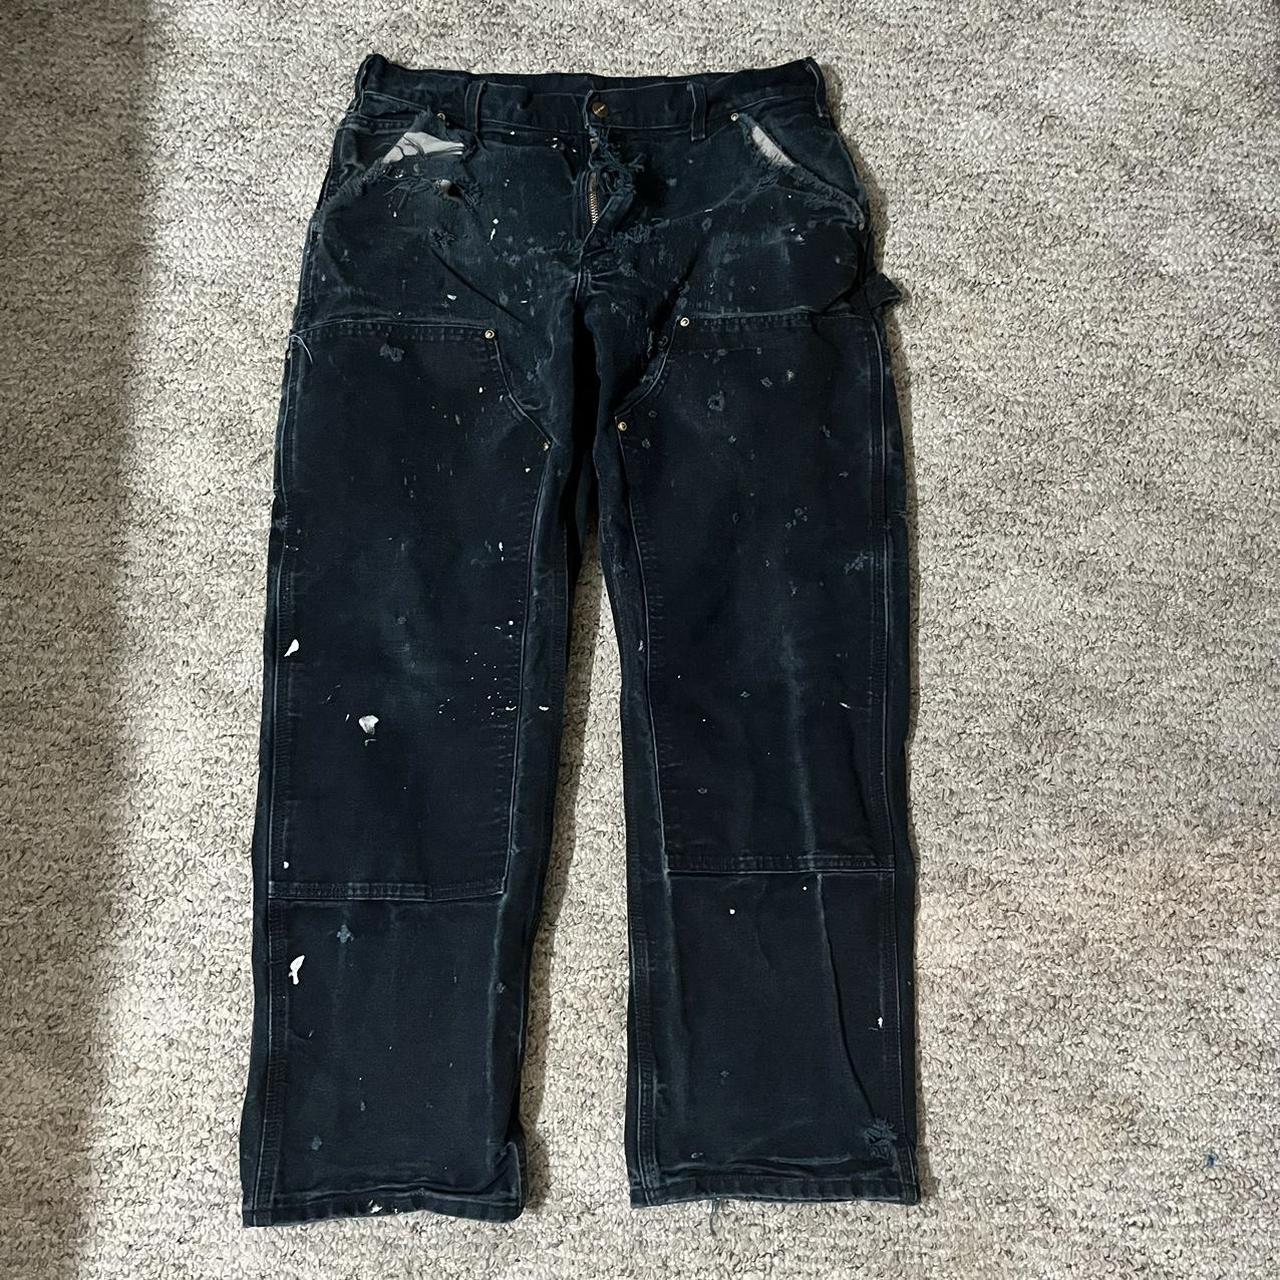 Black double knee distressed carhartts A bunch of... - Depop